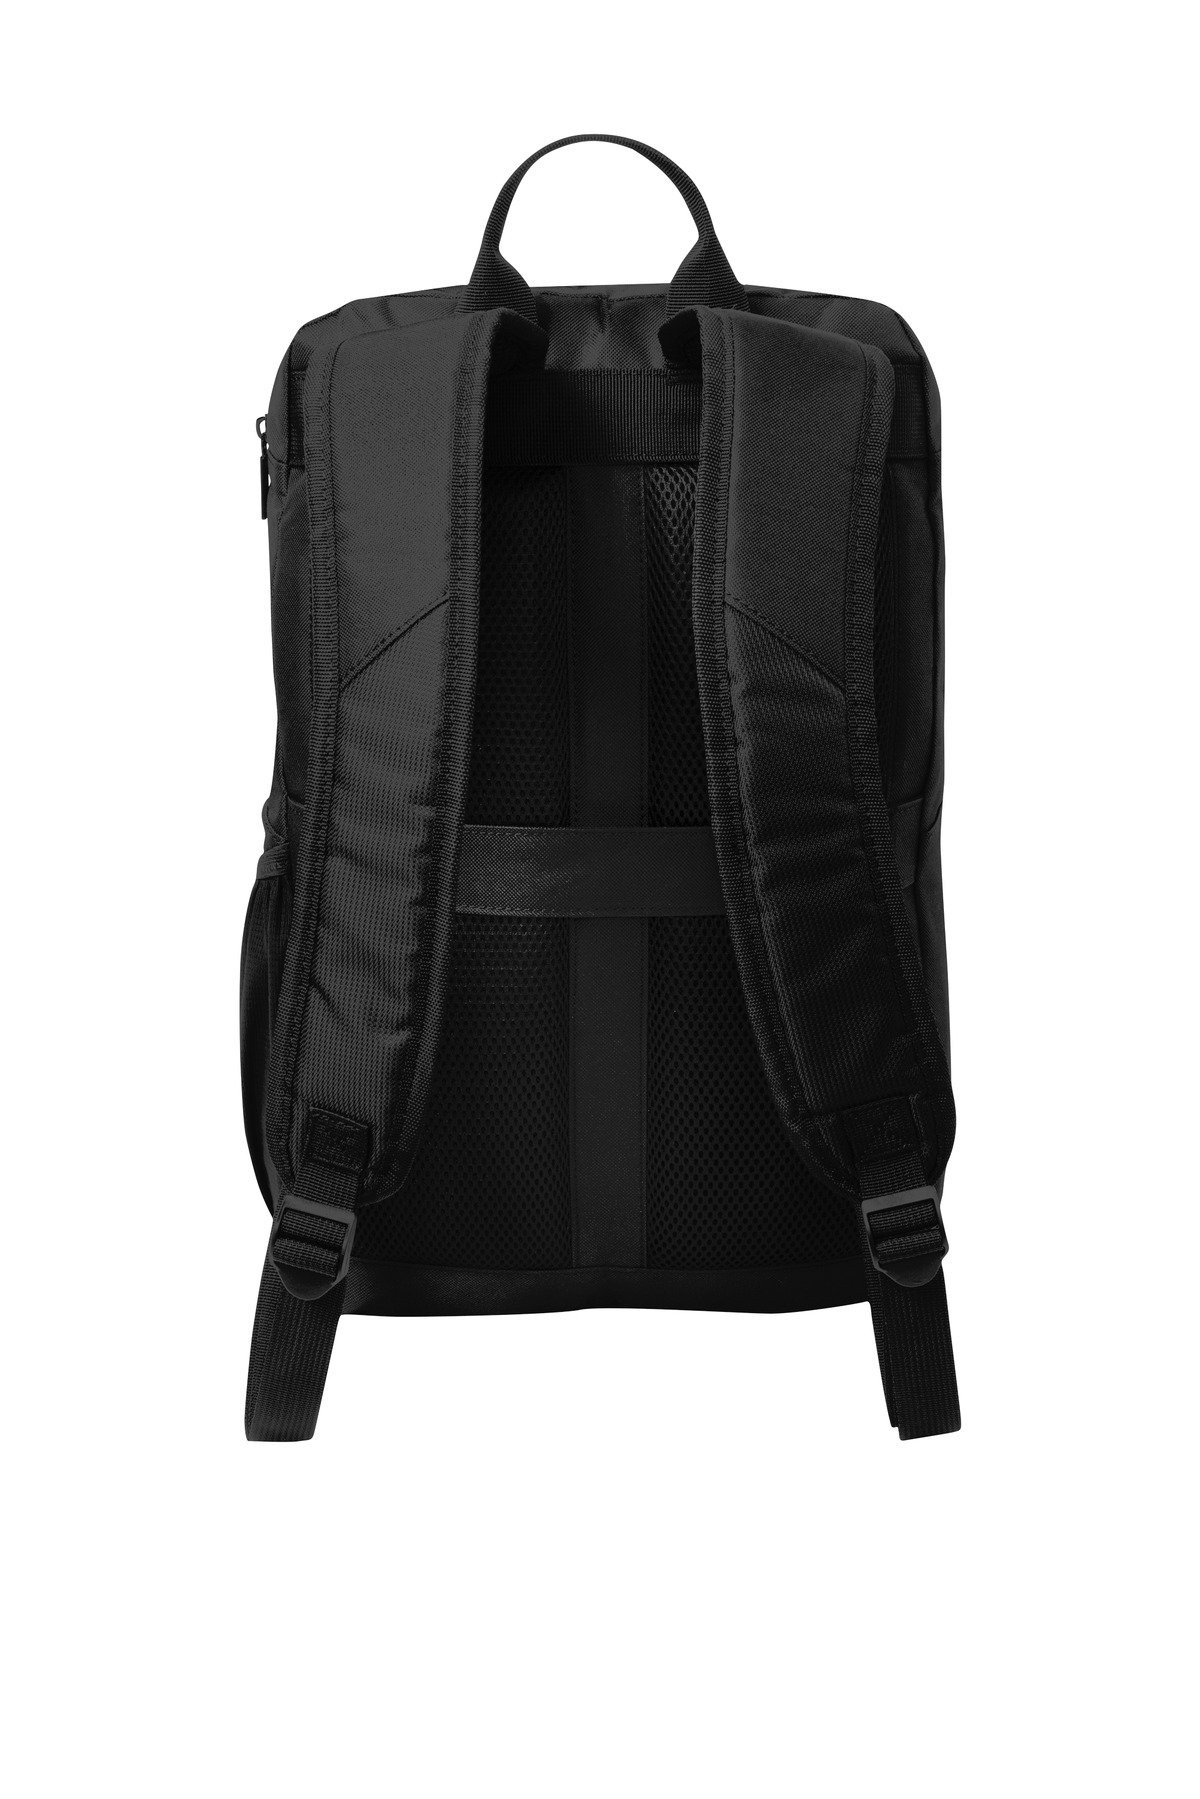 Port Authority Adult Unisex Plain Backpack Black One Size Fits All - image 3 of 3